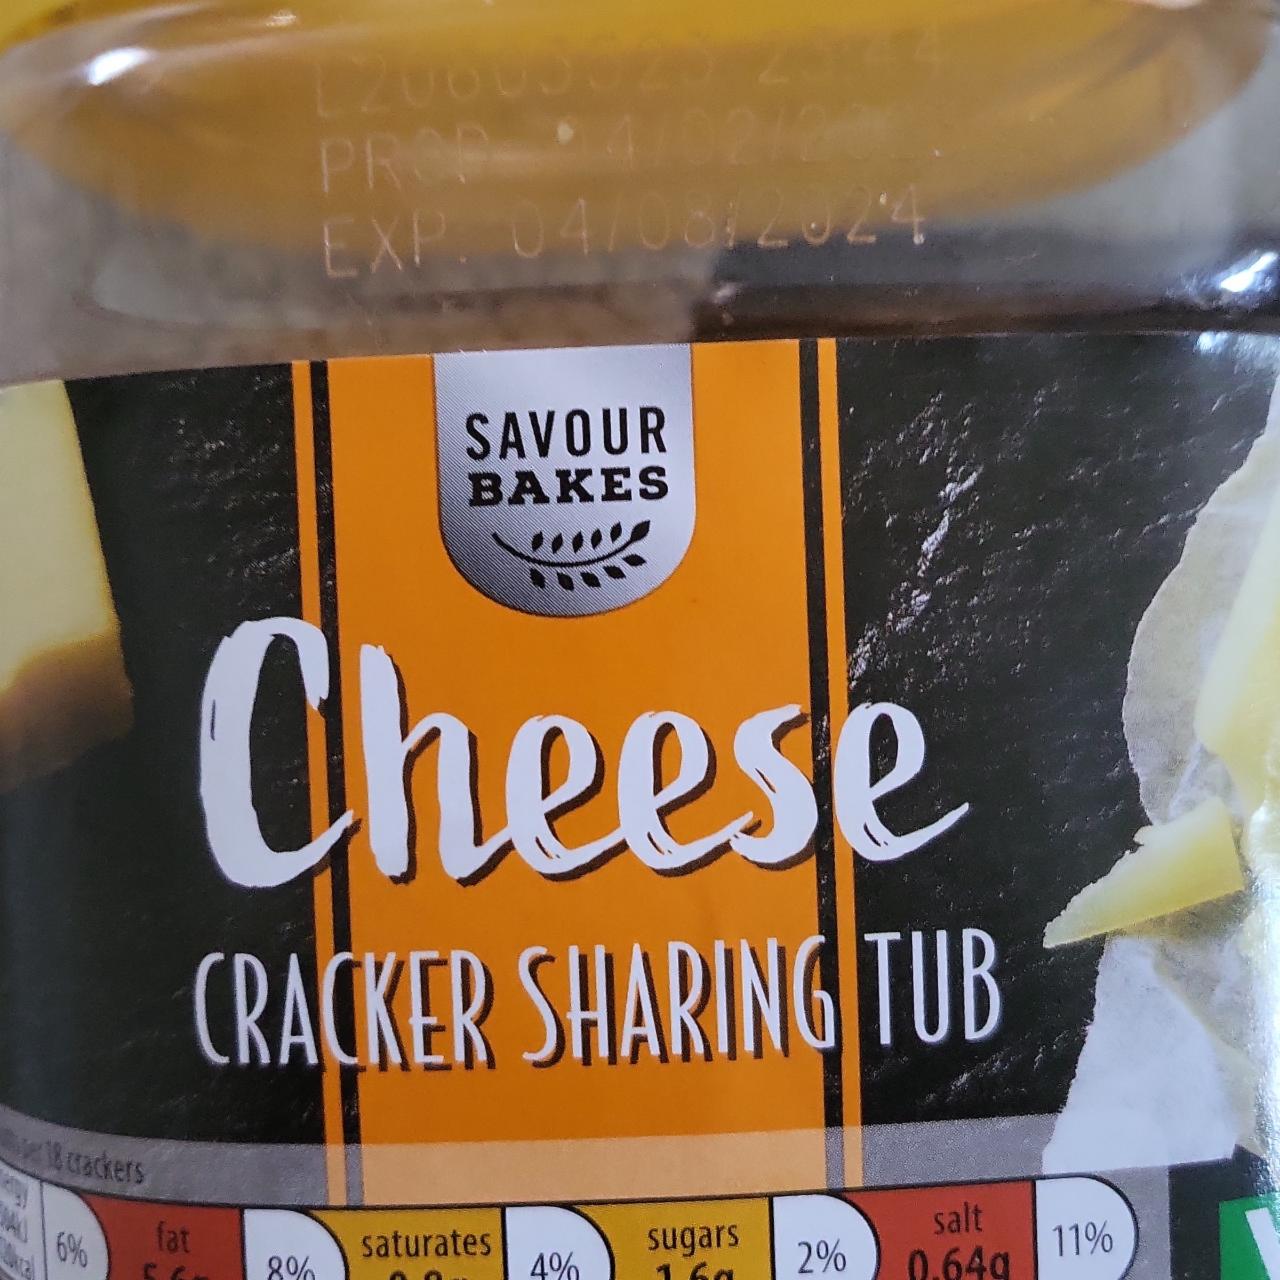 Fotografie - Cheese Crackers Sharing Tub Savour Bakes